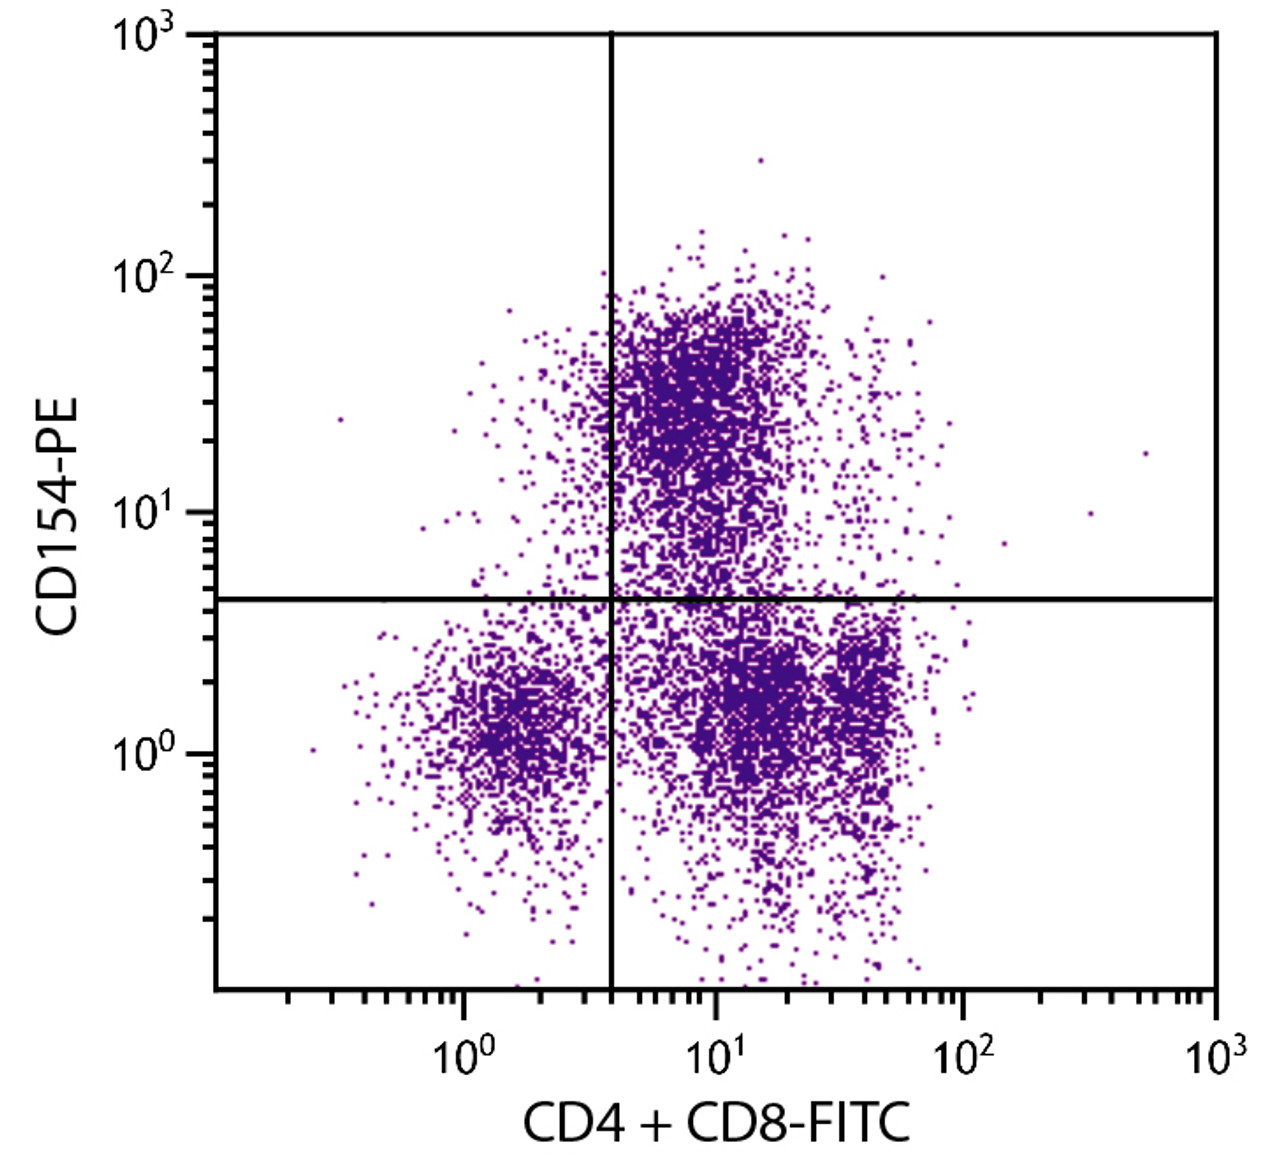 PMA and Ionomycin-stimulated BALB/c mouse splenic T cells were stained with Hamster Anti-Mouse CD154-PE, Rat Anti-Mouse CD4-FITC, and Rat Anti-Mouse CD8-FITC .